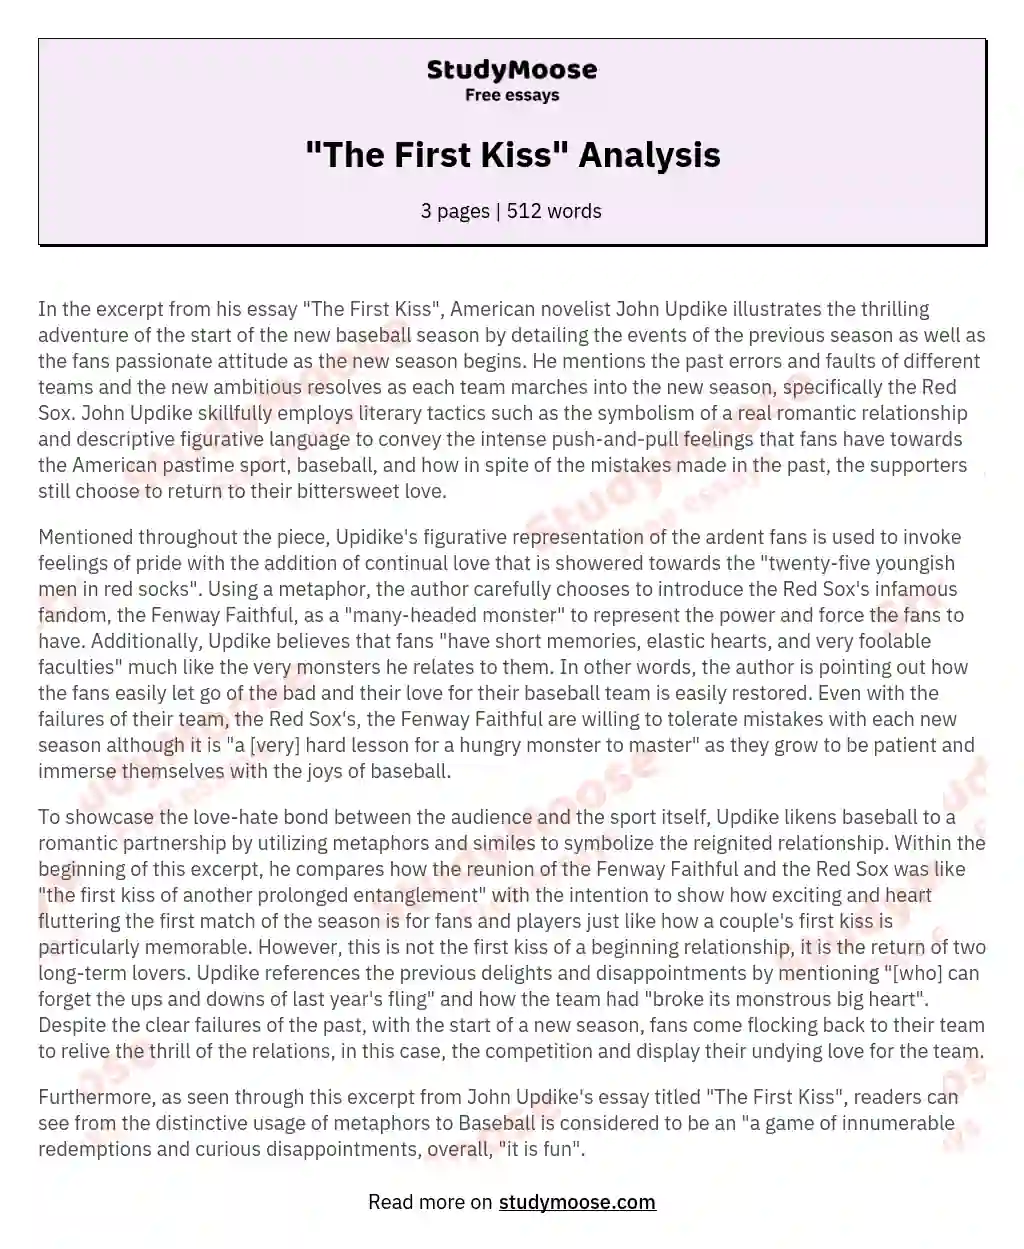 "The First Kiss" Analysis essay